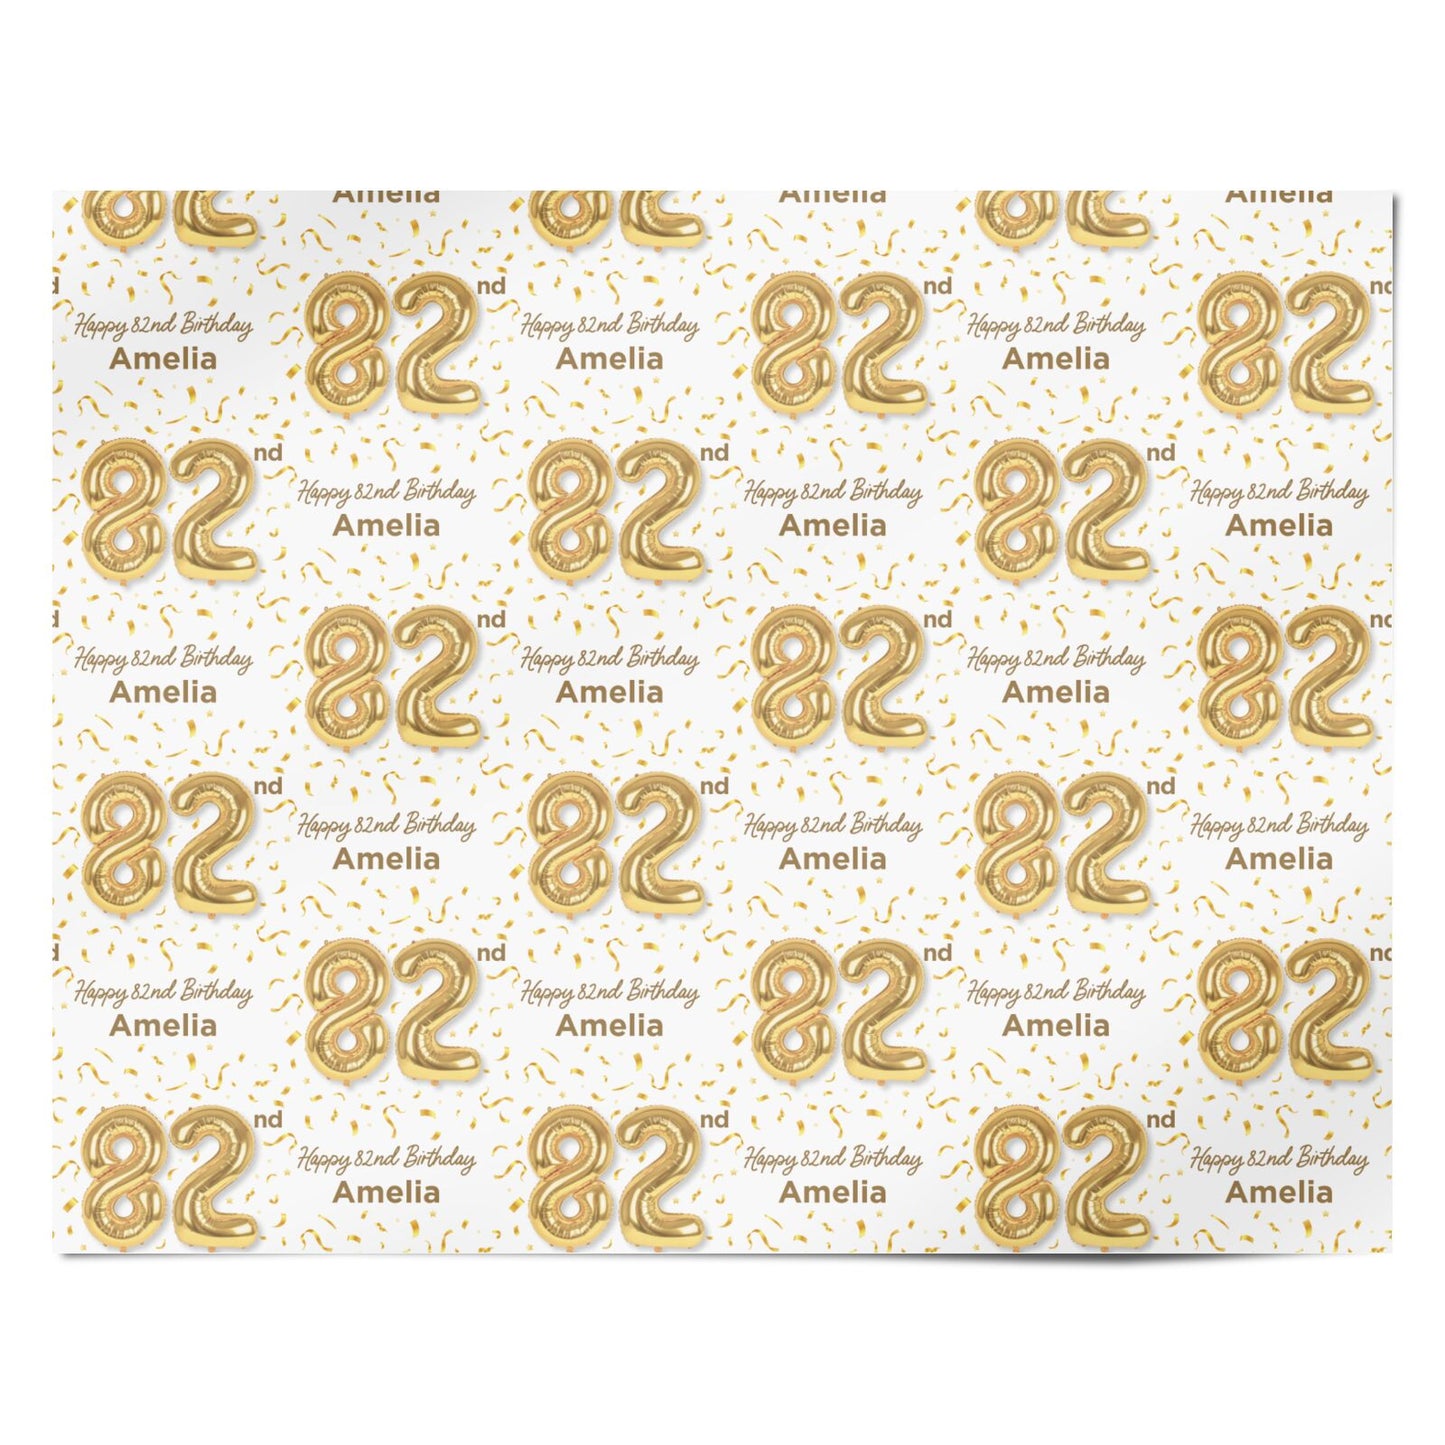 Personalised 82nd Birthday Personalised Wrapping Paper Alternative